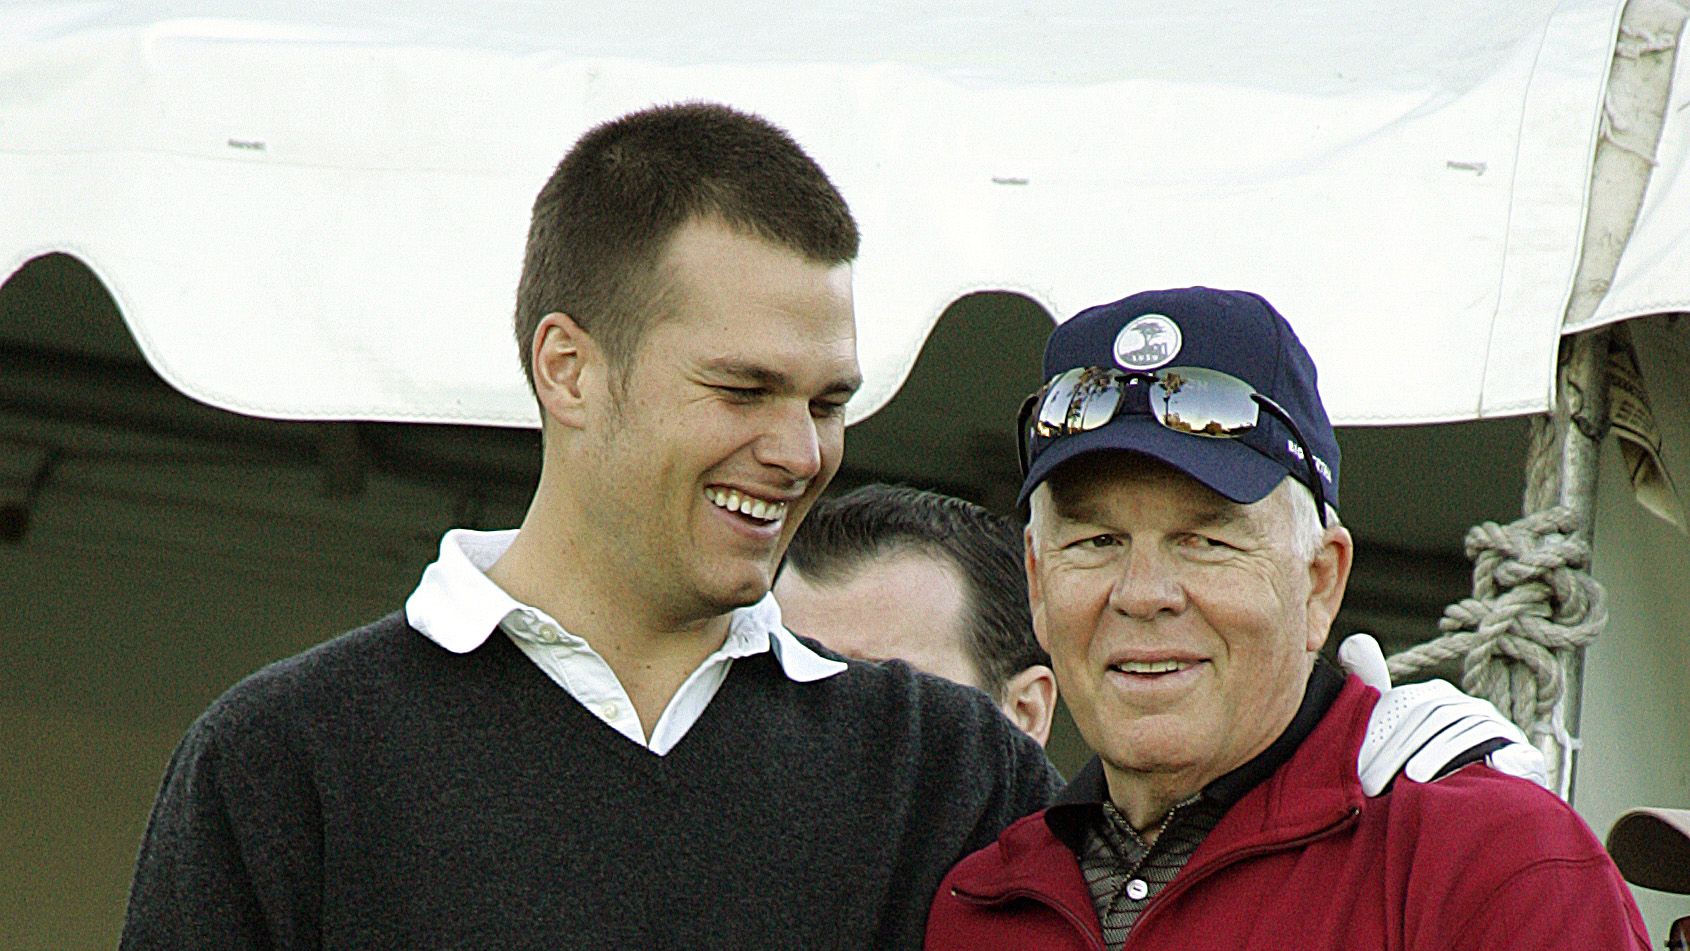 Once-in-a-lifetime deal': Tom Brady Sr. on ceremony to honor son